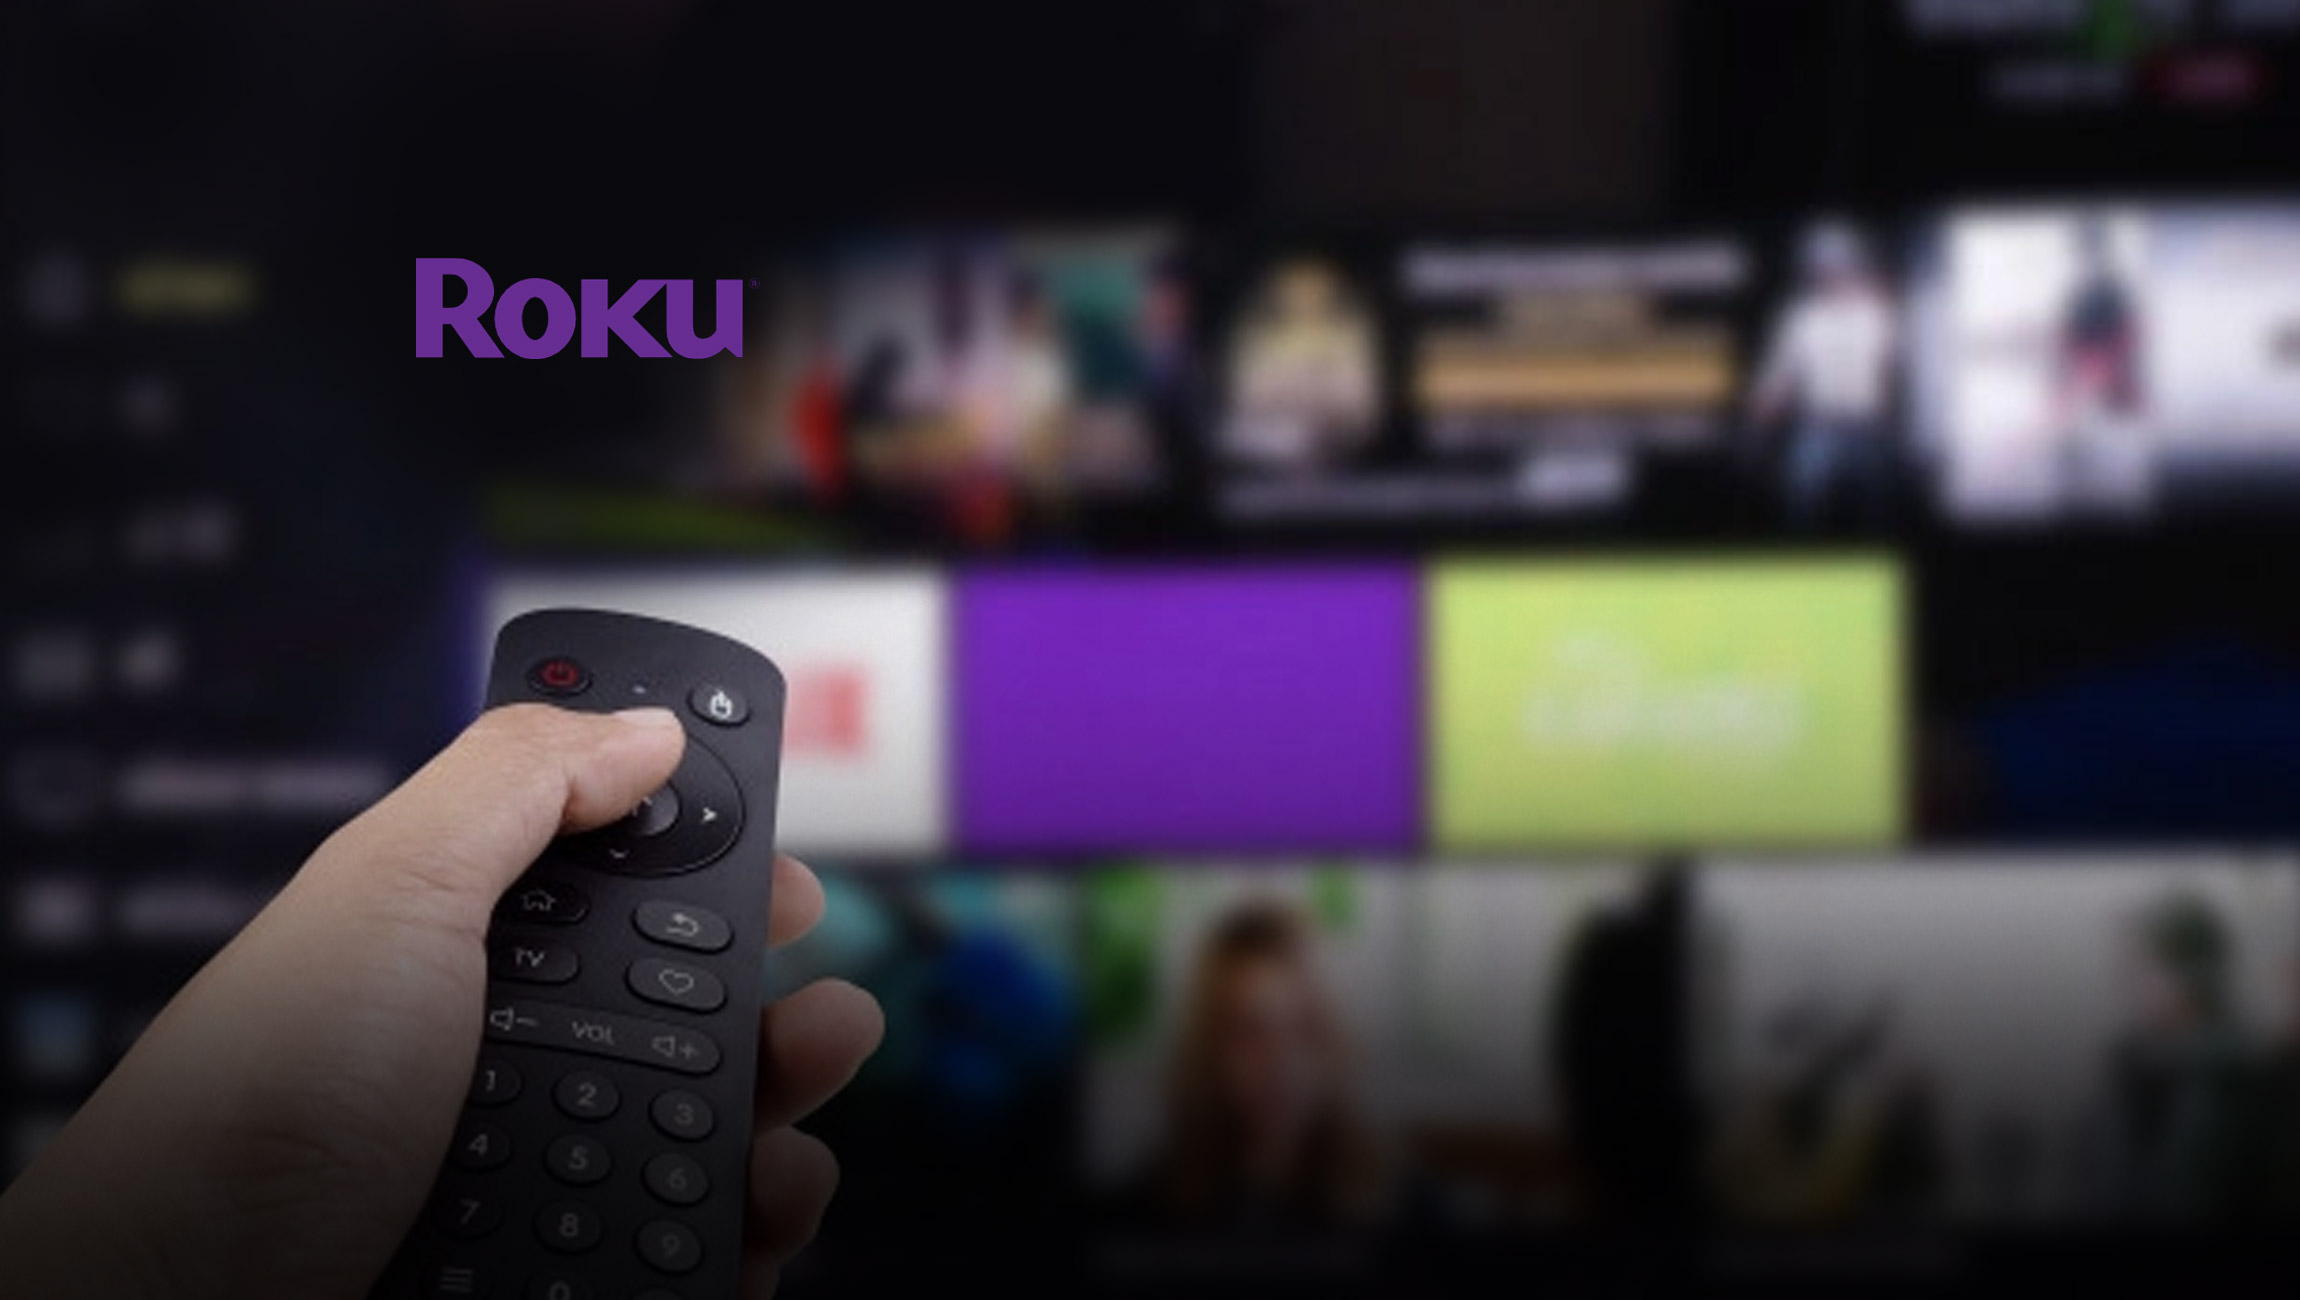 Roku TV Is No. 1 Selling Smart TV Operating System (OS) in U.S. and Canada